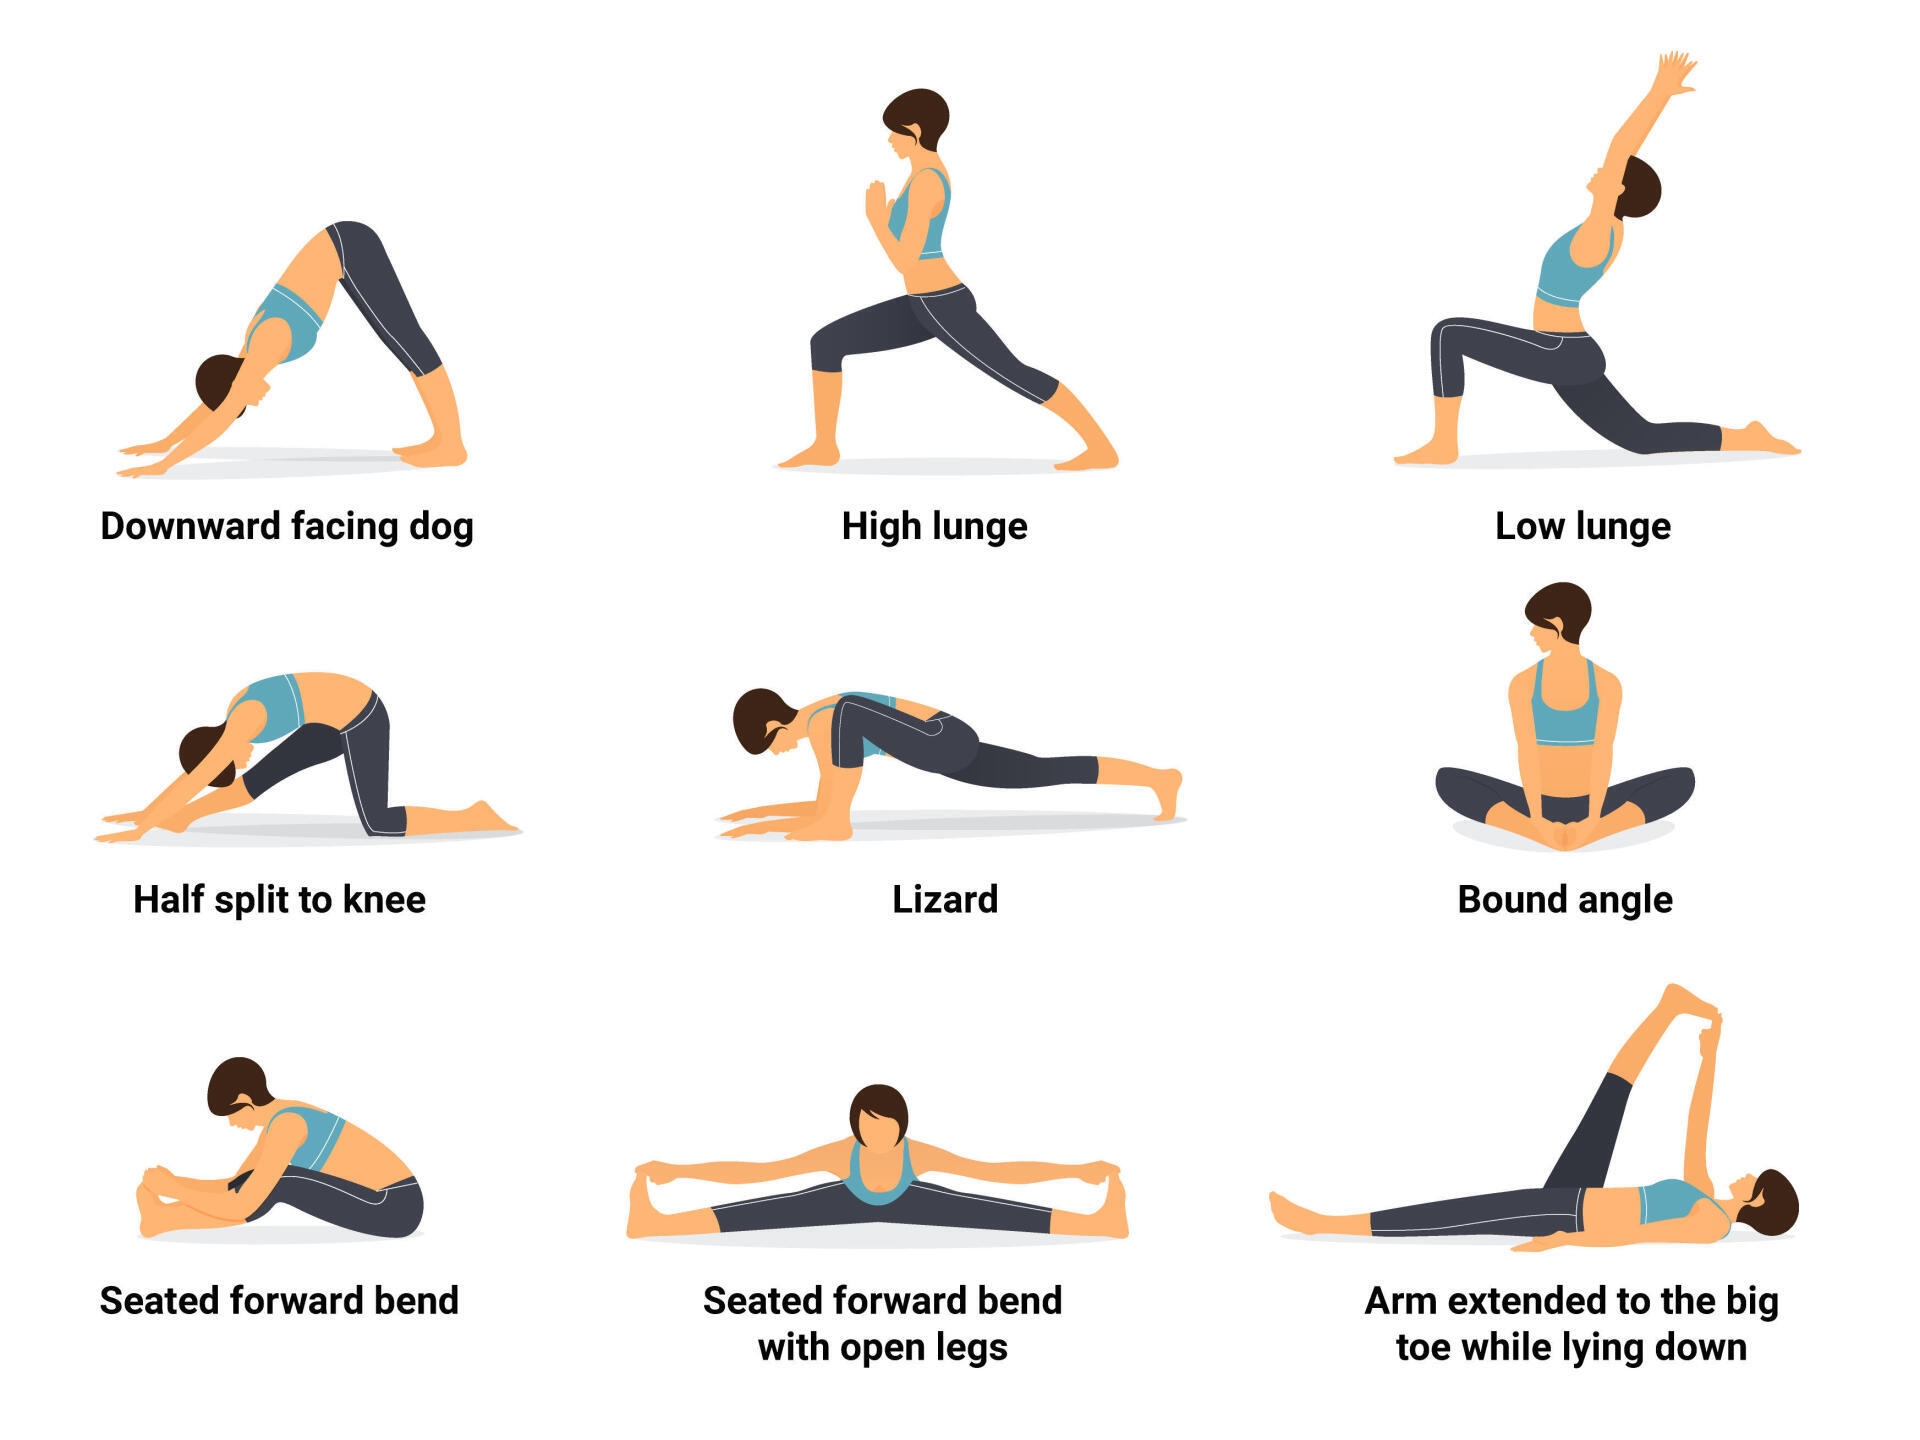 Practice These 10 Yoga Poses to Relieve Knee Pain | YouAligned.com